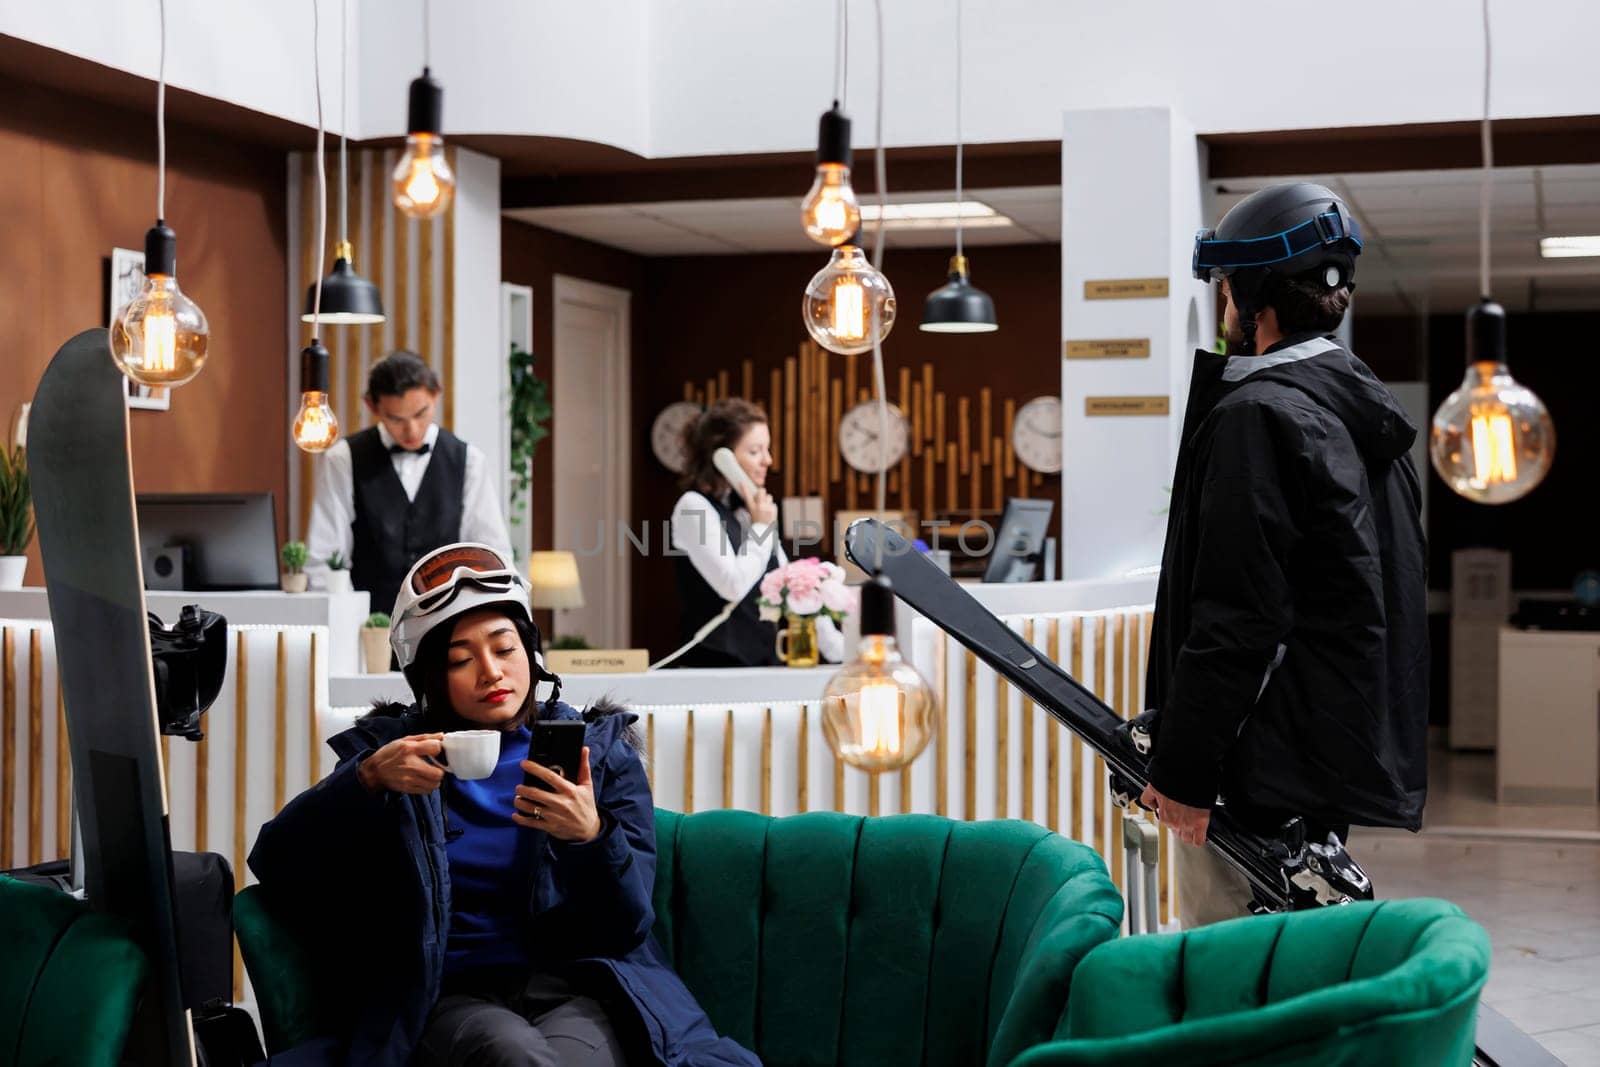 Male traveler with skiing skis arriving at hotel lobby during winter holiday while woman with cup in hand, comfortably seated on sofa browsing mobile device. Receptionists working in the background.